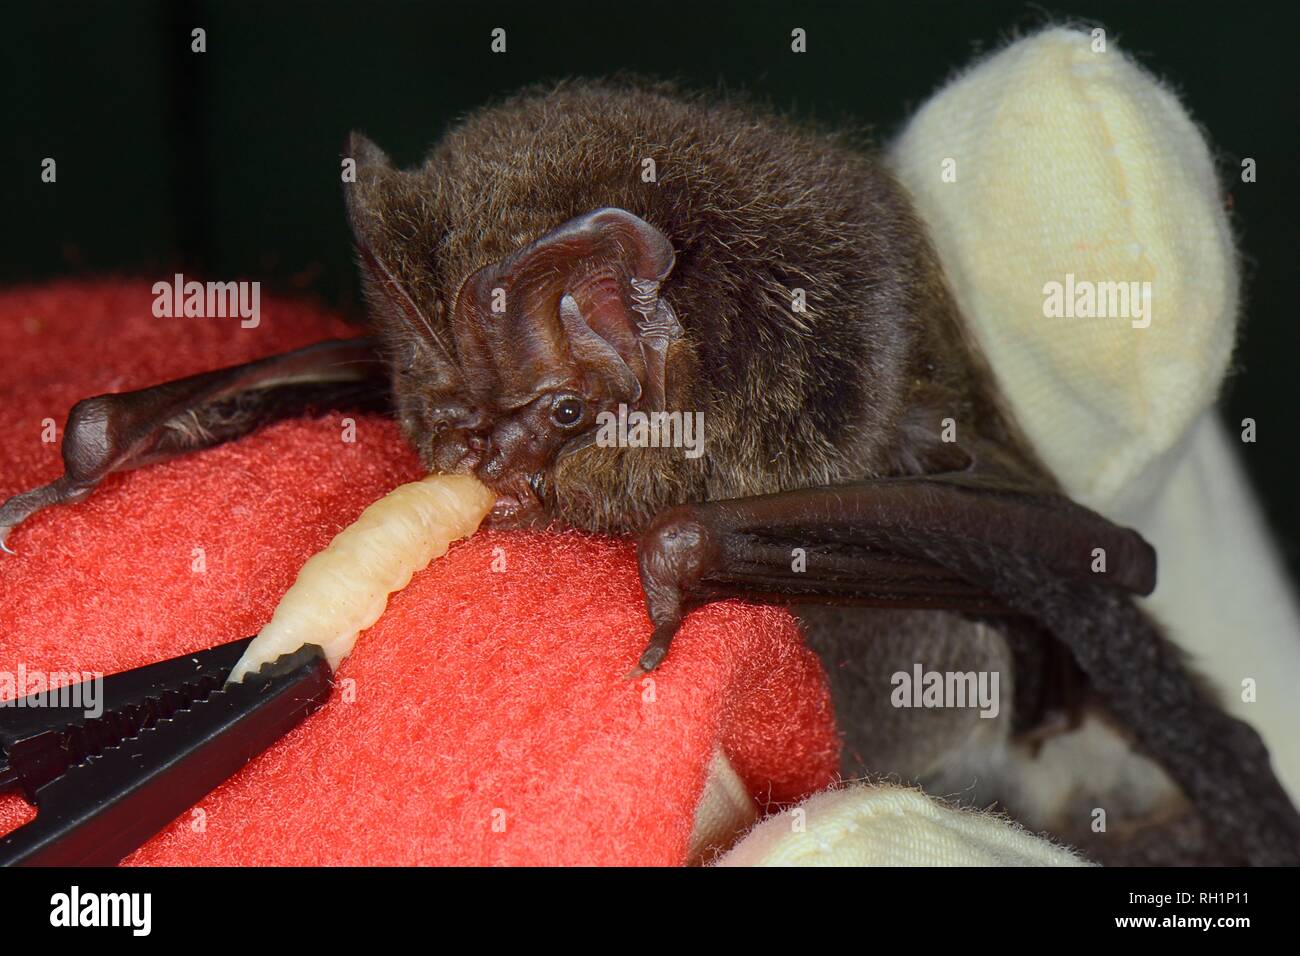 Juvenile Barbastelle bat (Barbastella barbastellus) found weak and unable to fly, being offered a Waxworm at the bat rescue centre, Barnstaple, UK Stock Photo